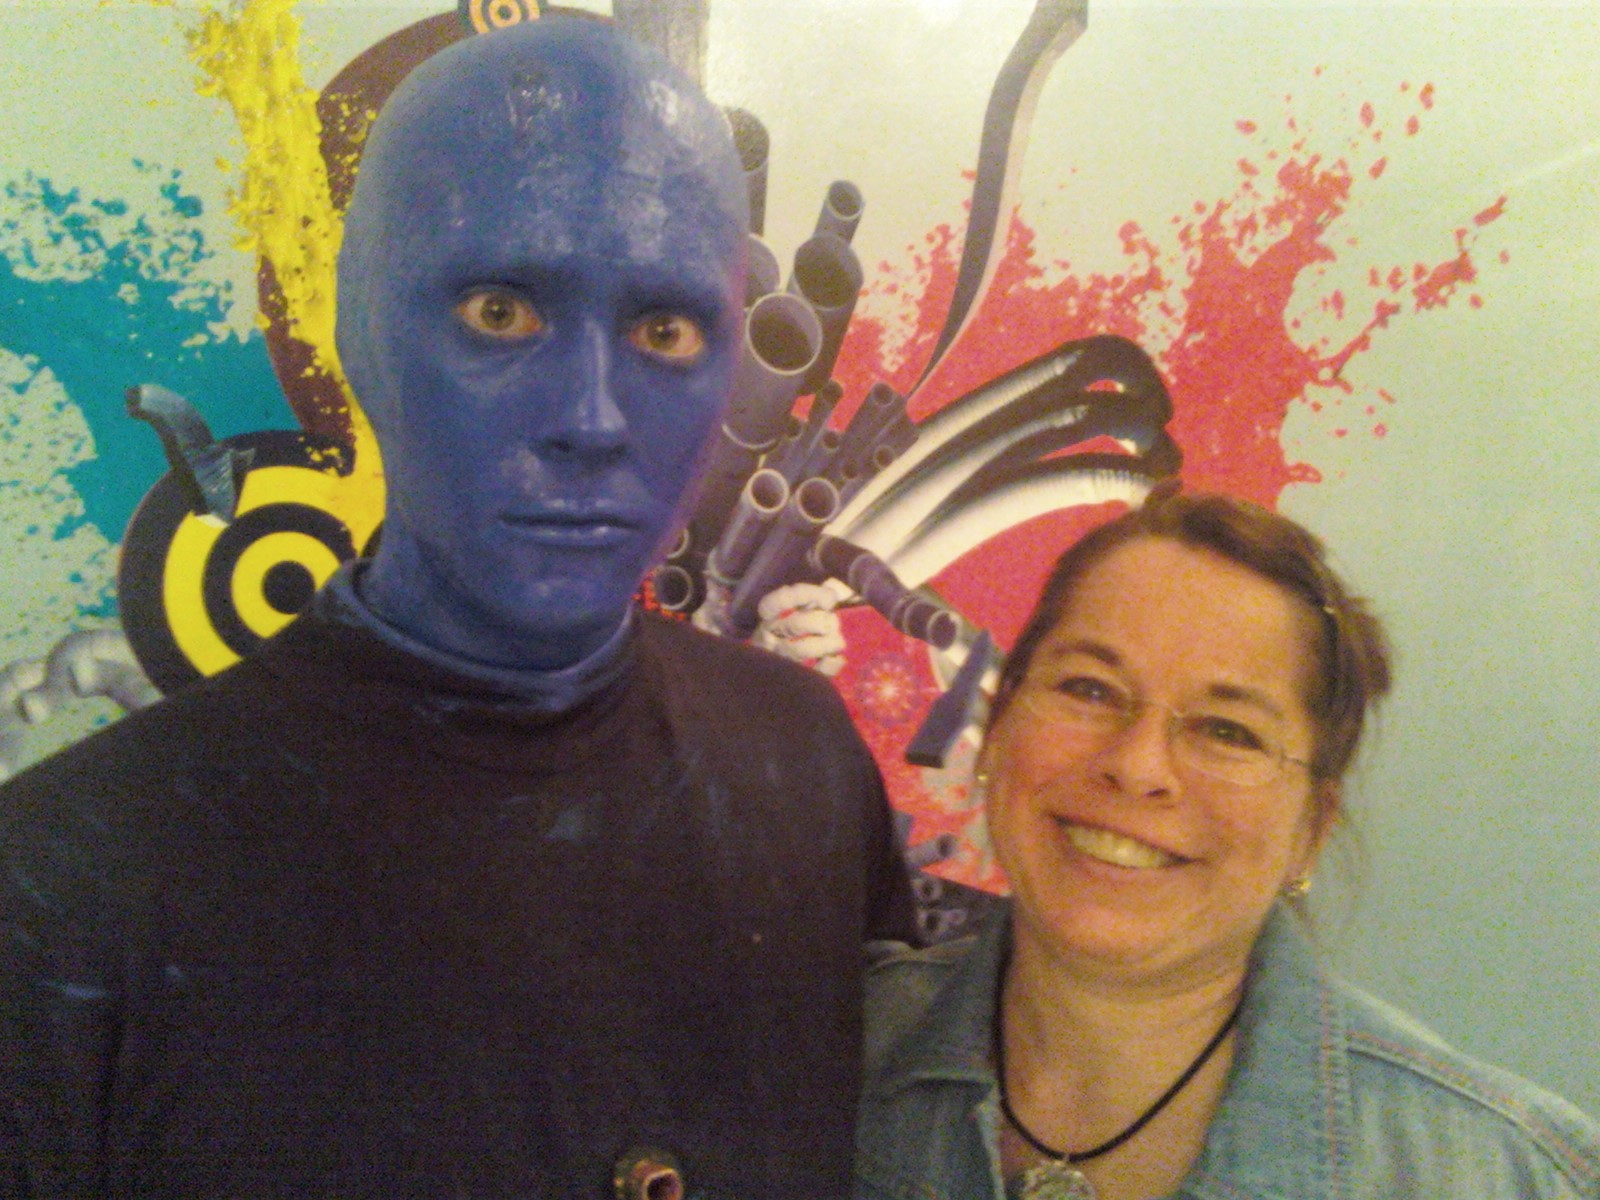 Blue man group March 2009